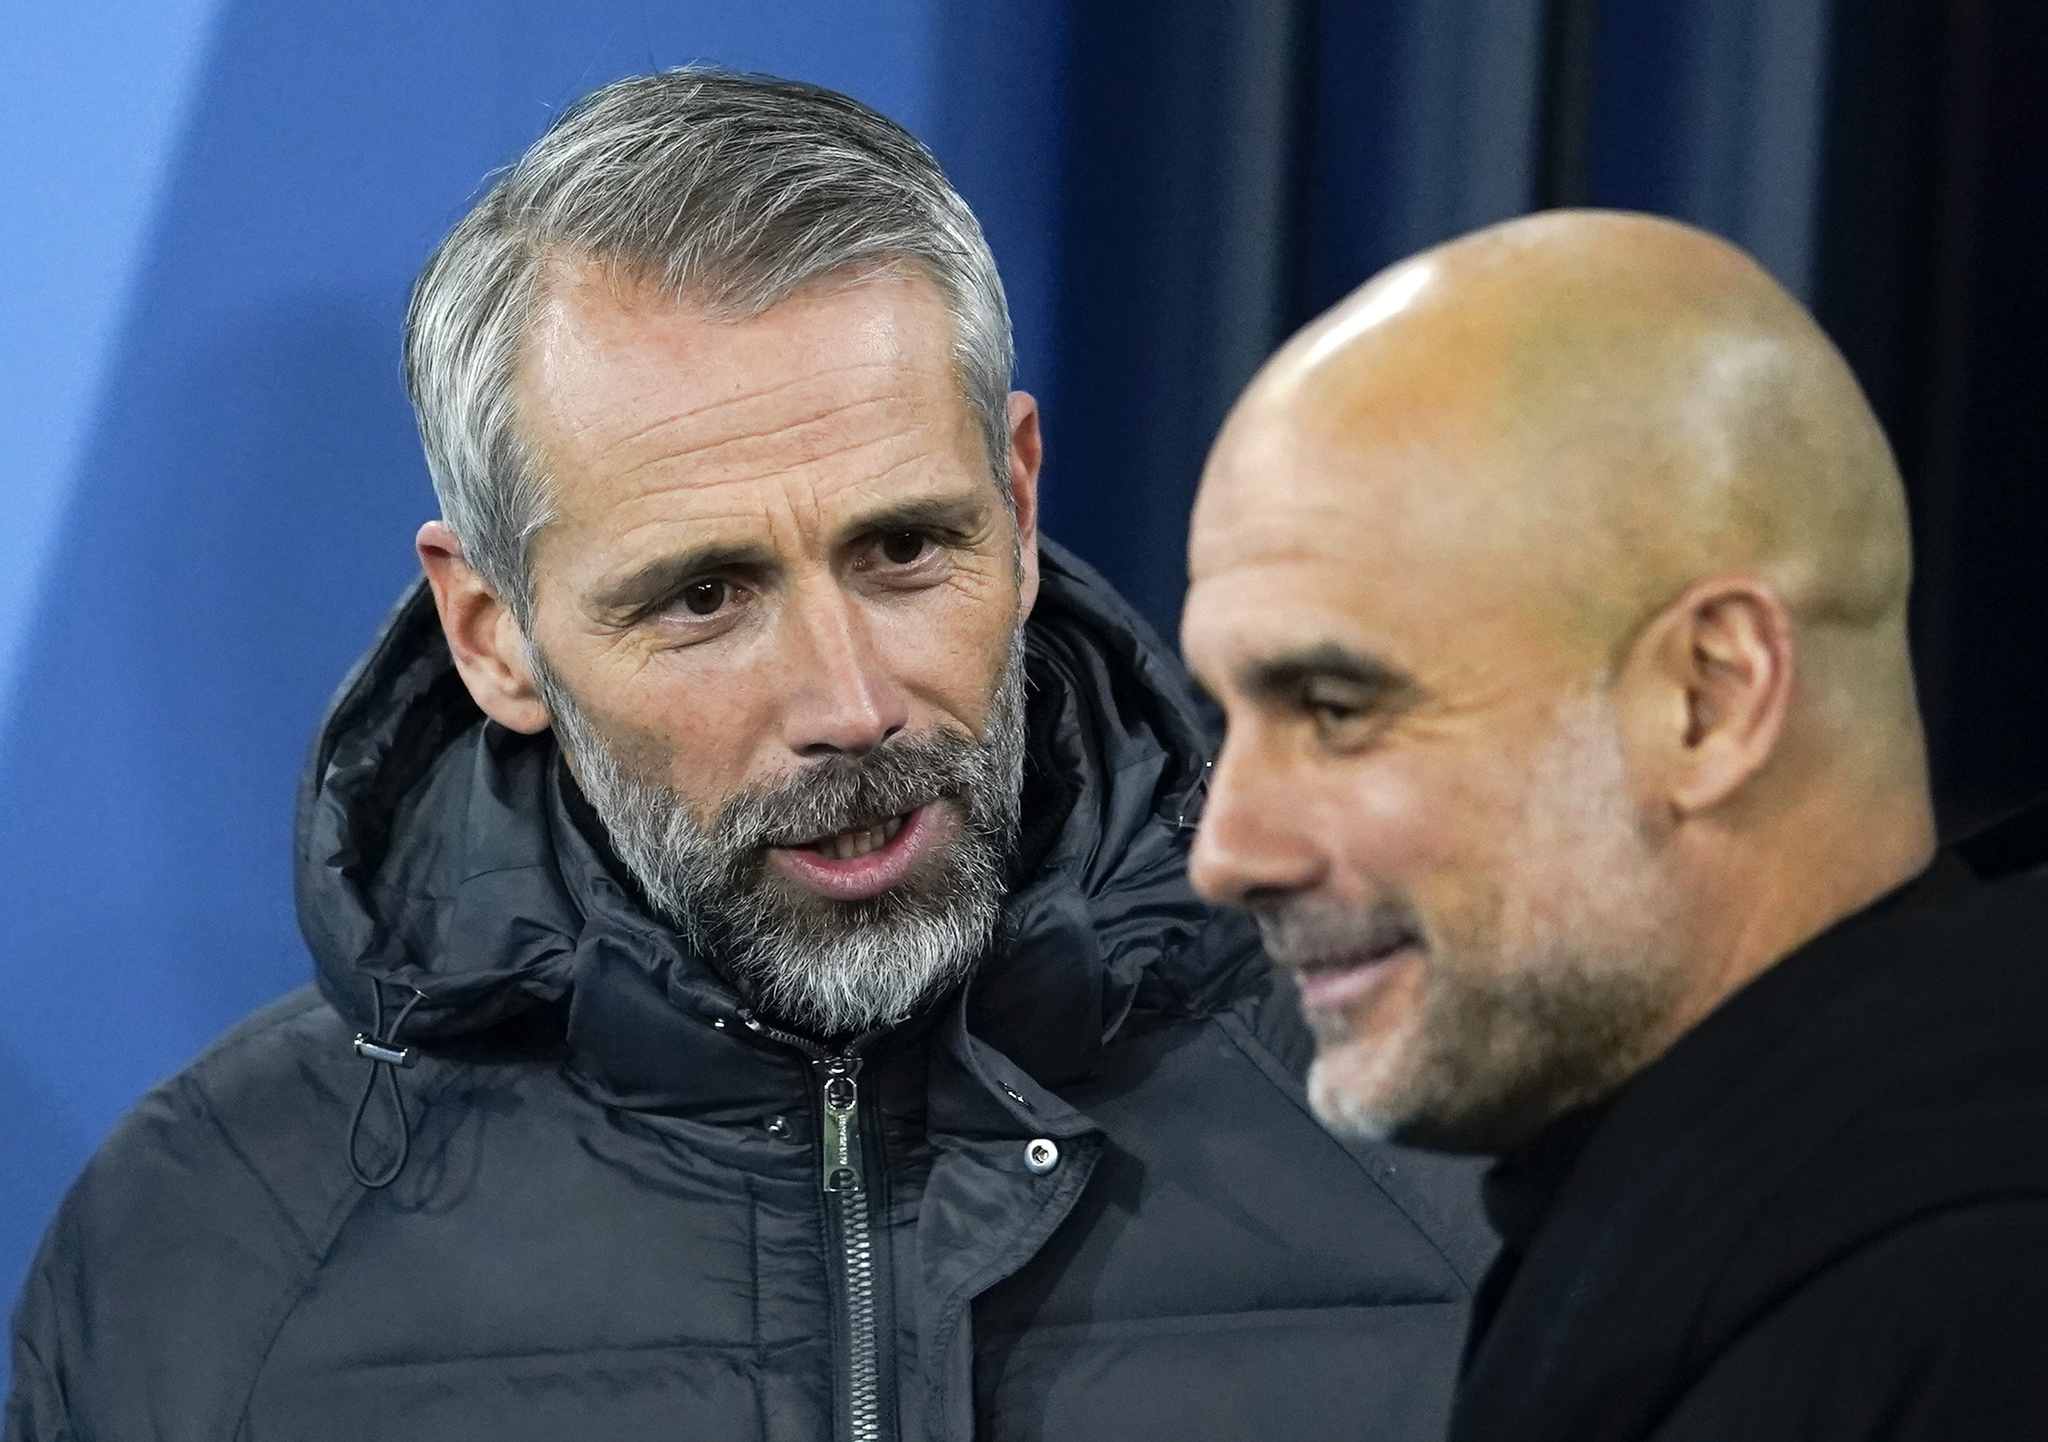 Leipzig's head coach Marco Rose, left, talks to  lt;HIT gt;Manchester lt;/HIT gt; City's head coach Pep Guardiola ahead of the Champions League round of 16 second leg soccer match between  lt;HIT gt;Manchester lt;/HIT gt; City and RB Leipzig at the Etihad stadium in  lt;HIT gt;Manchester lt;/HIT gt;, England, Tuesday, March 14, 2023. (AP Photo/Dave Thompson)